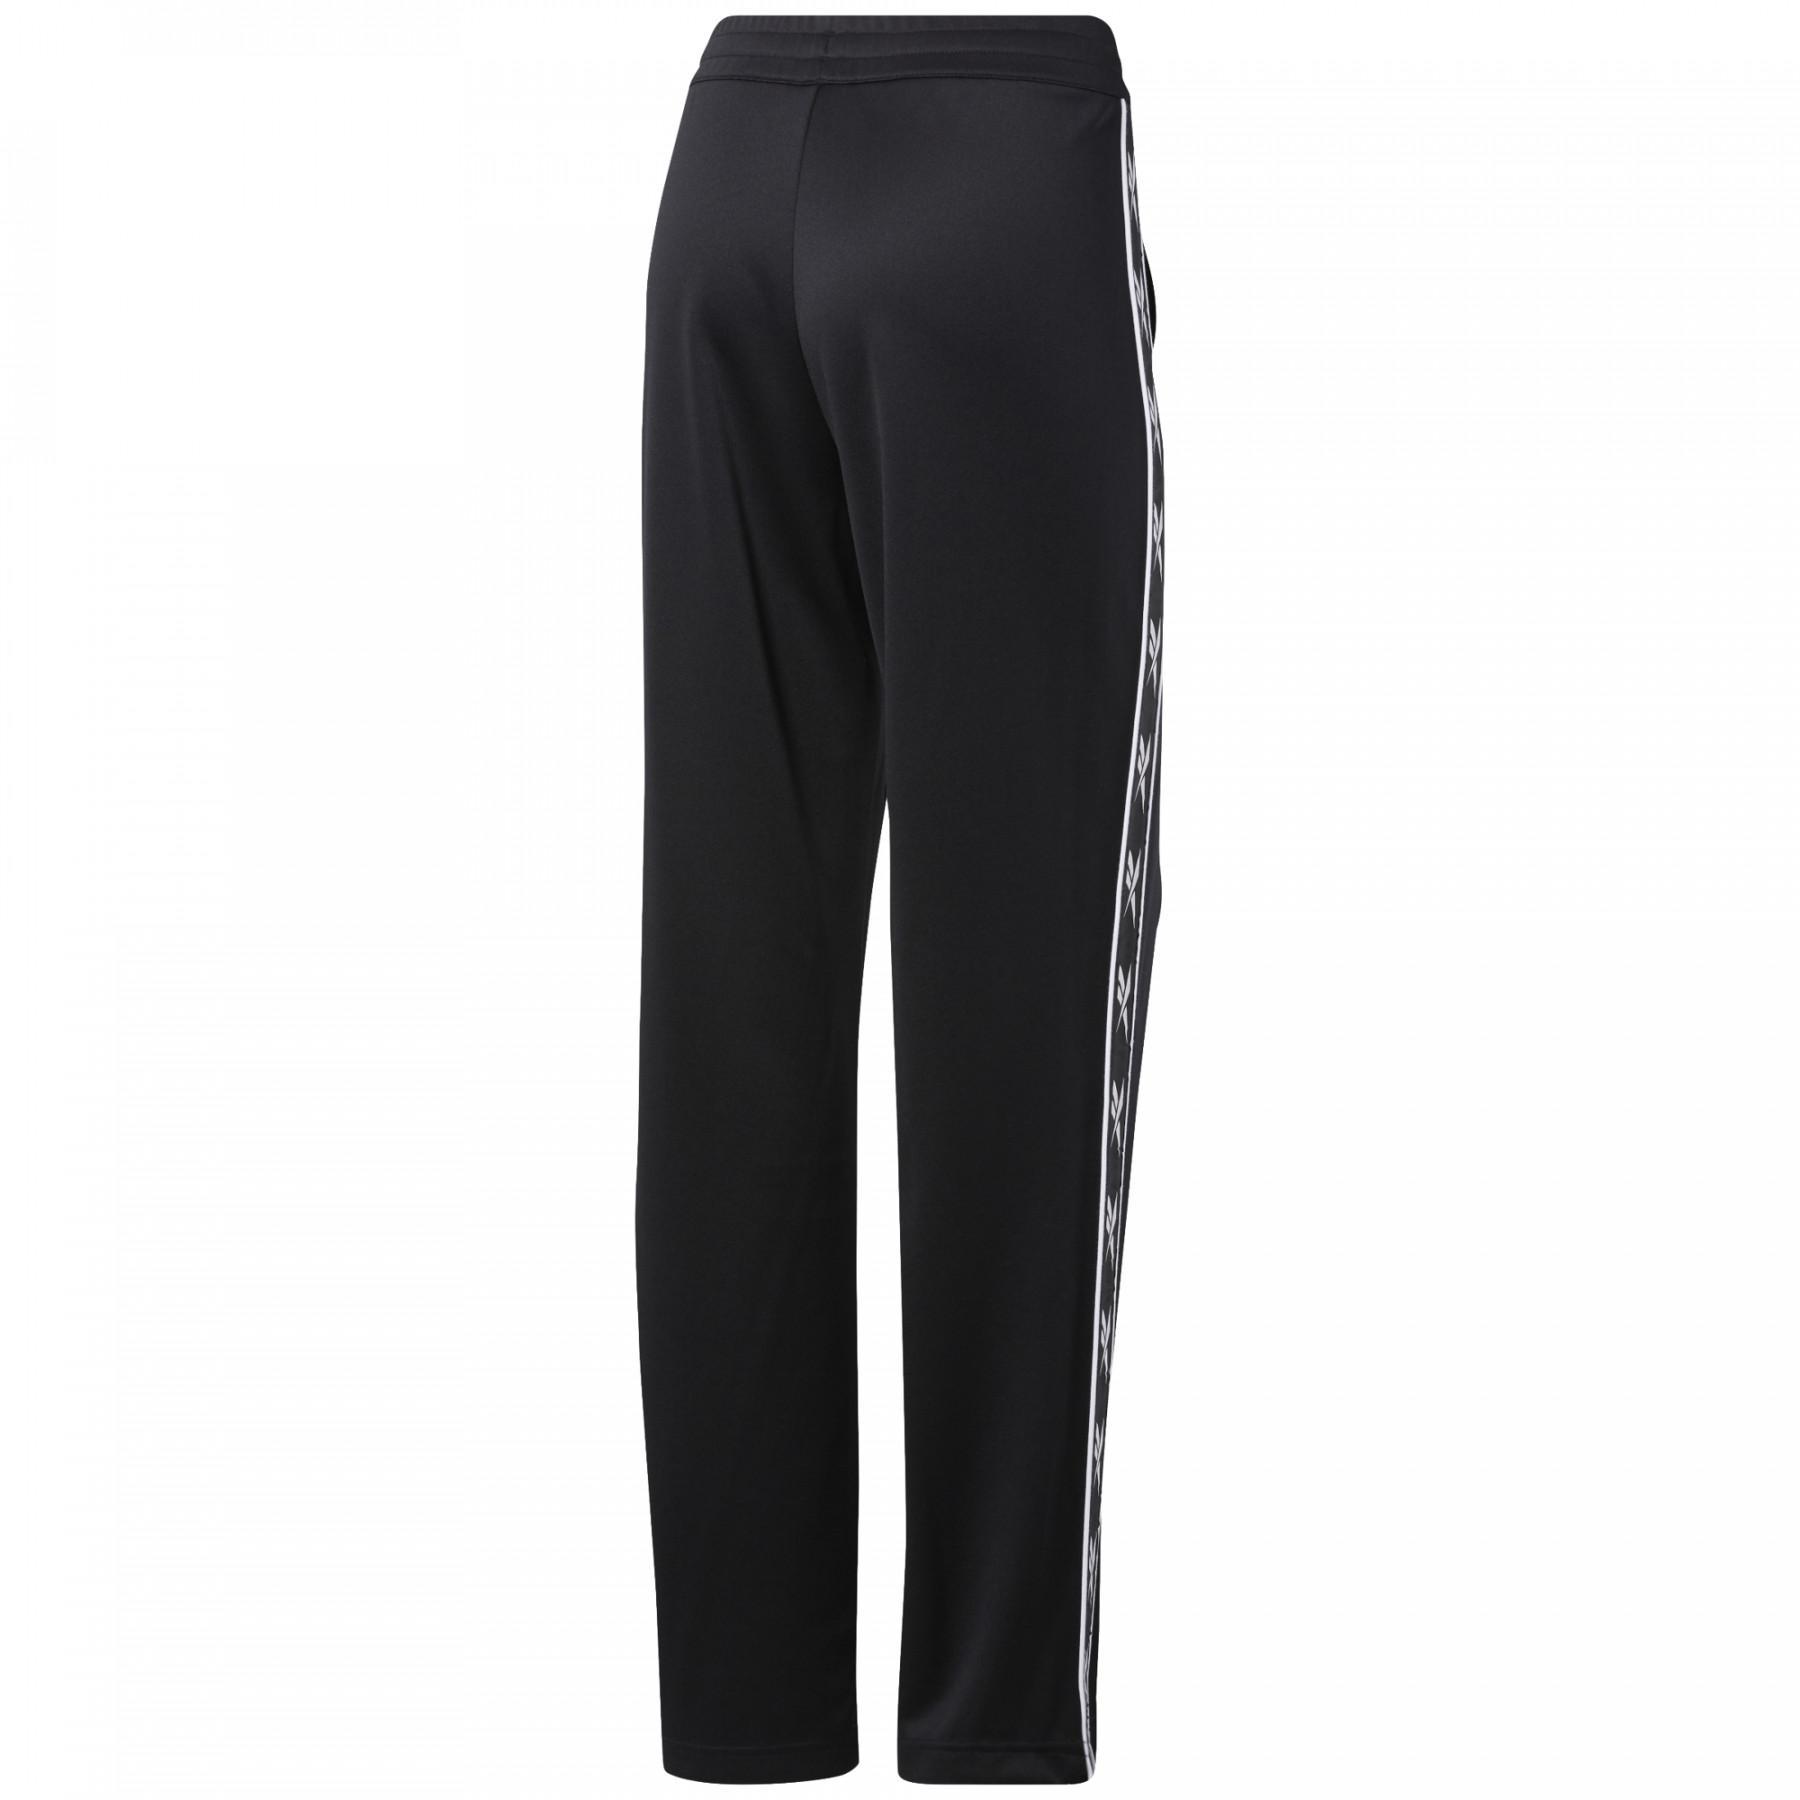 Trousers woman Reebok with Vector stripes